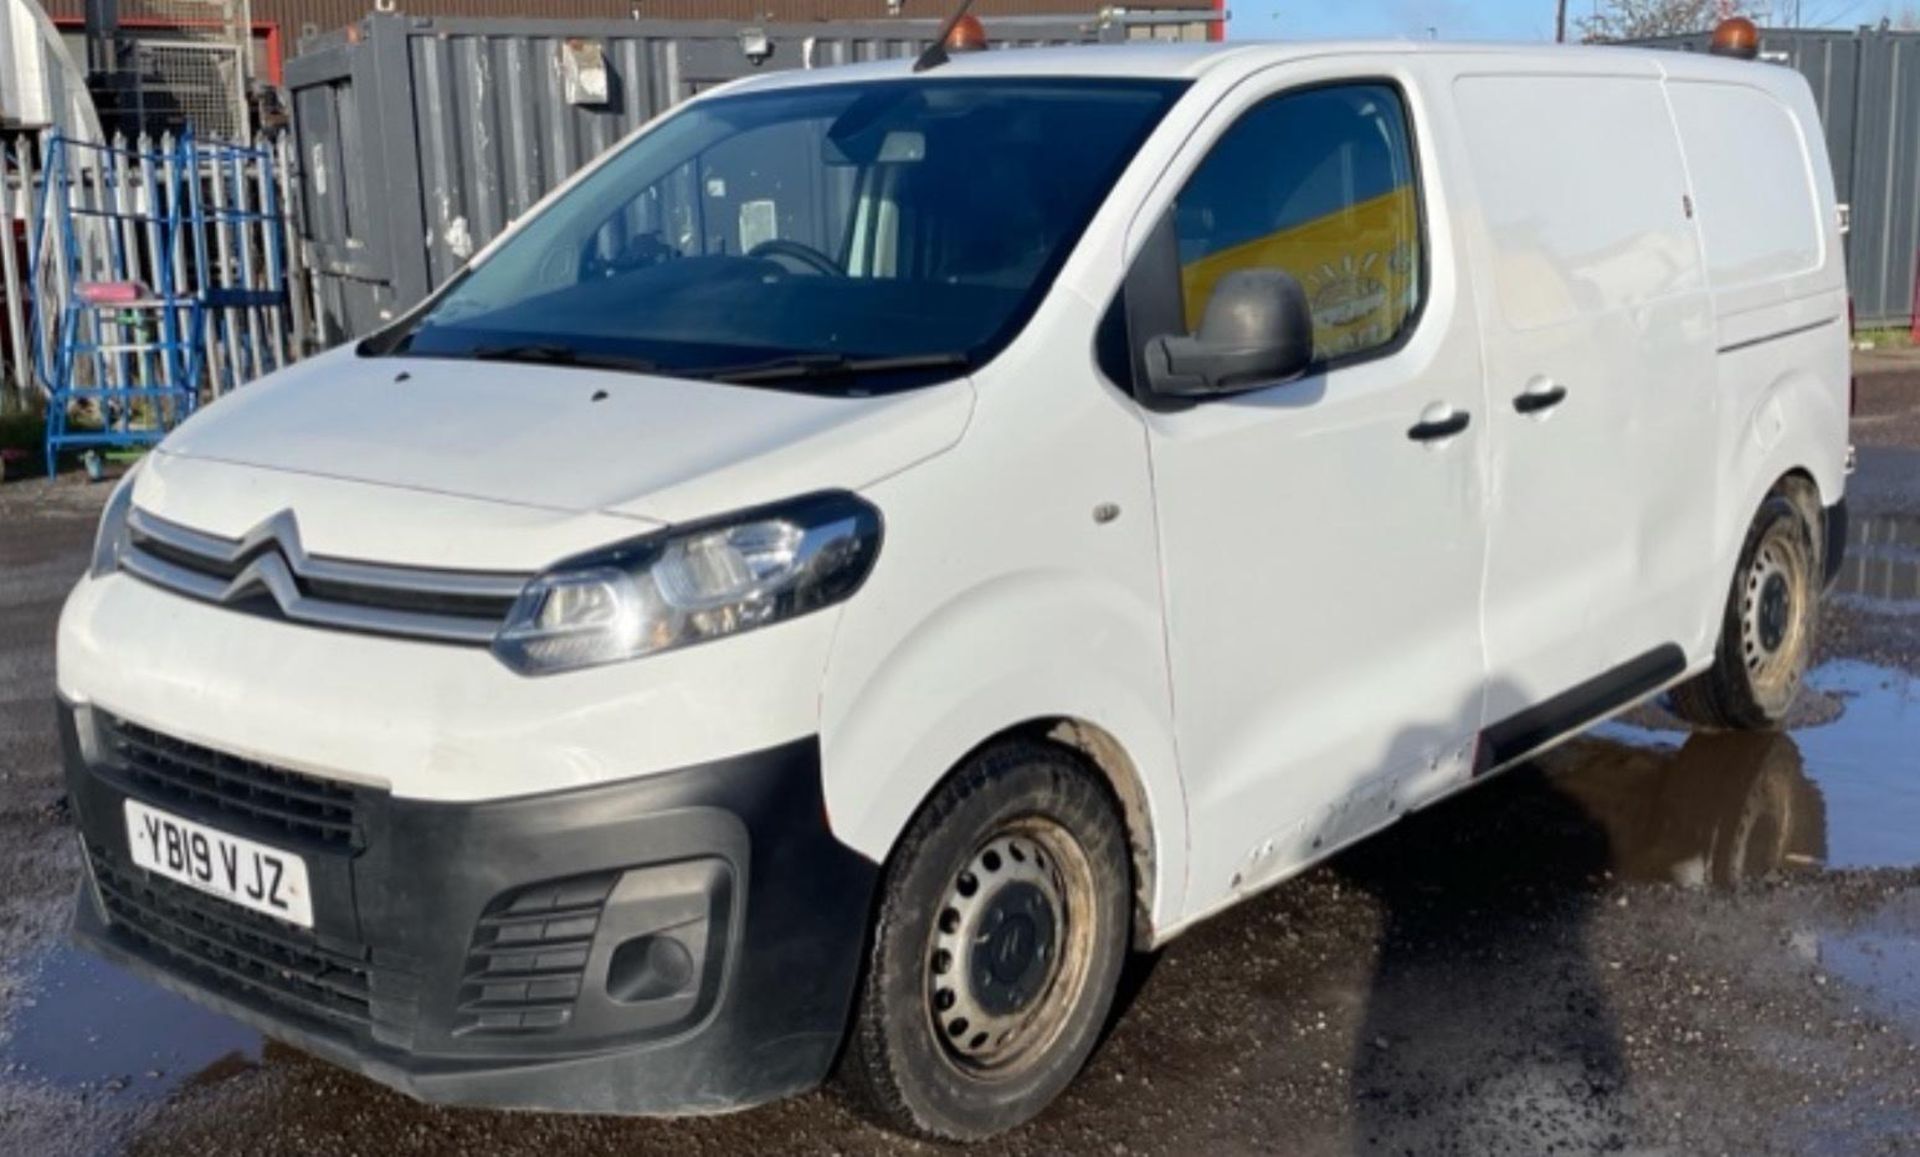 2019 CITROEN DISPATCH -117K MILES- HPI CLEAR - READY FOR WORK !